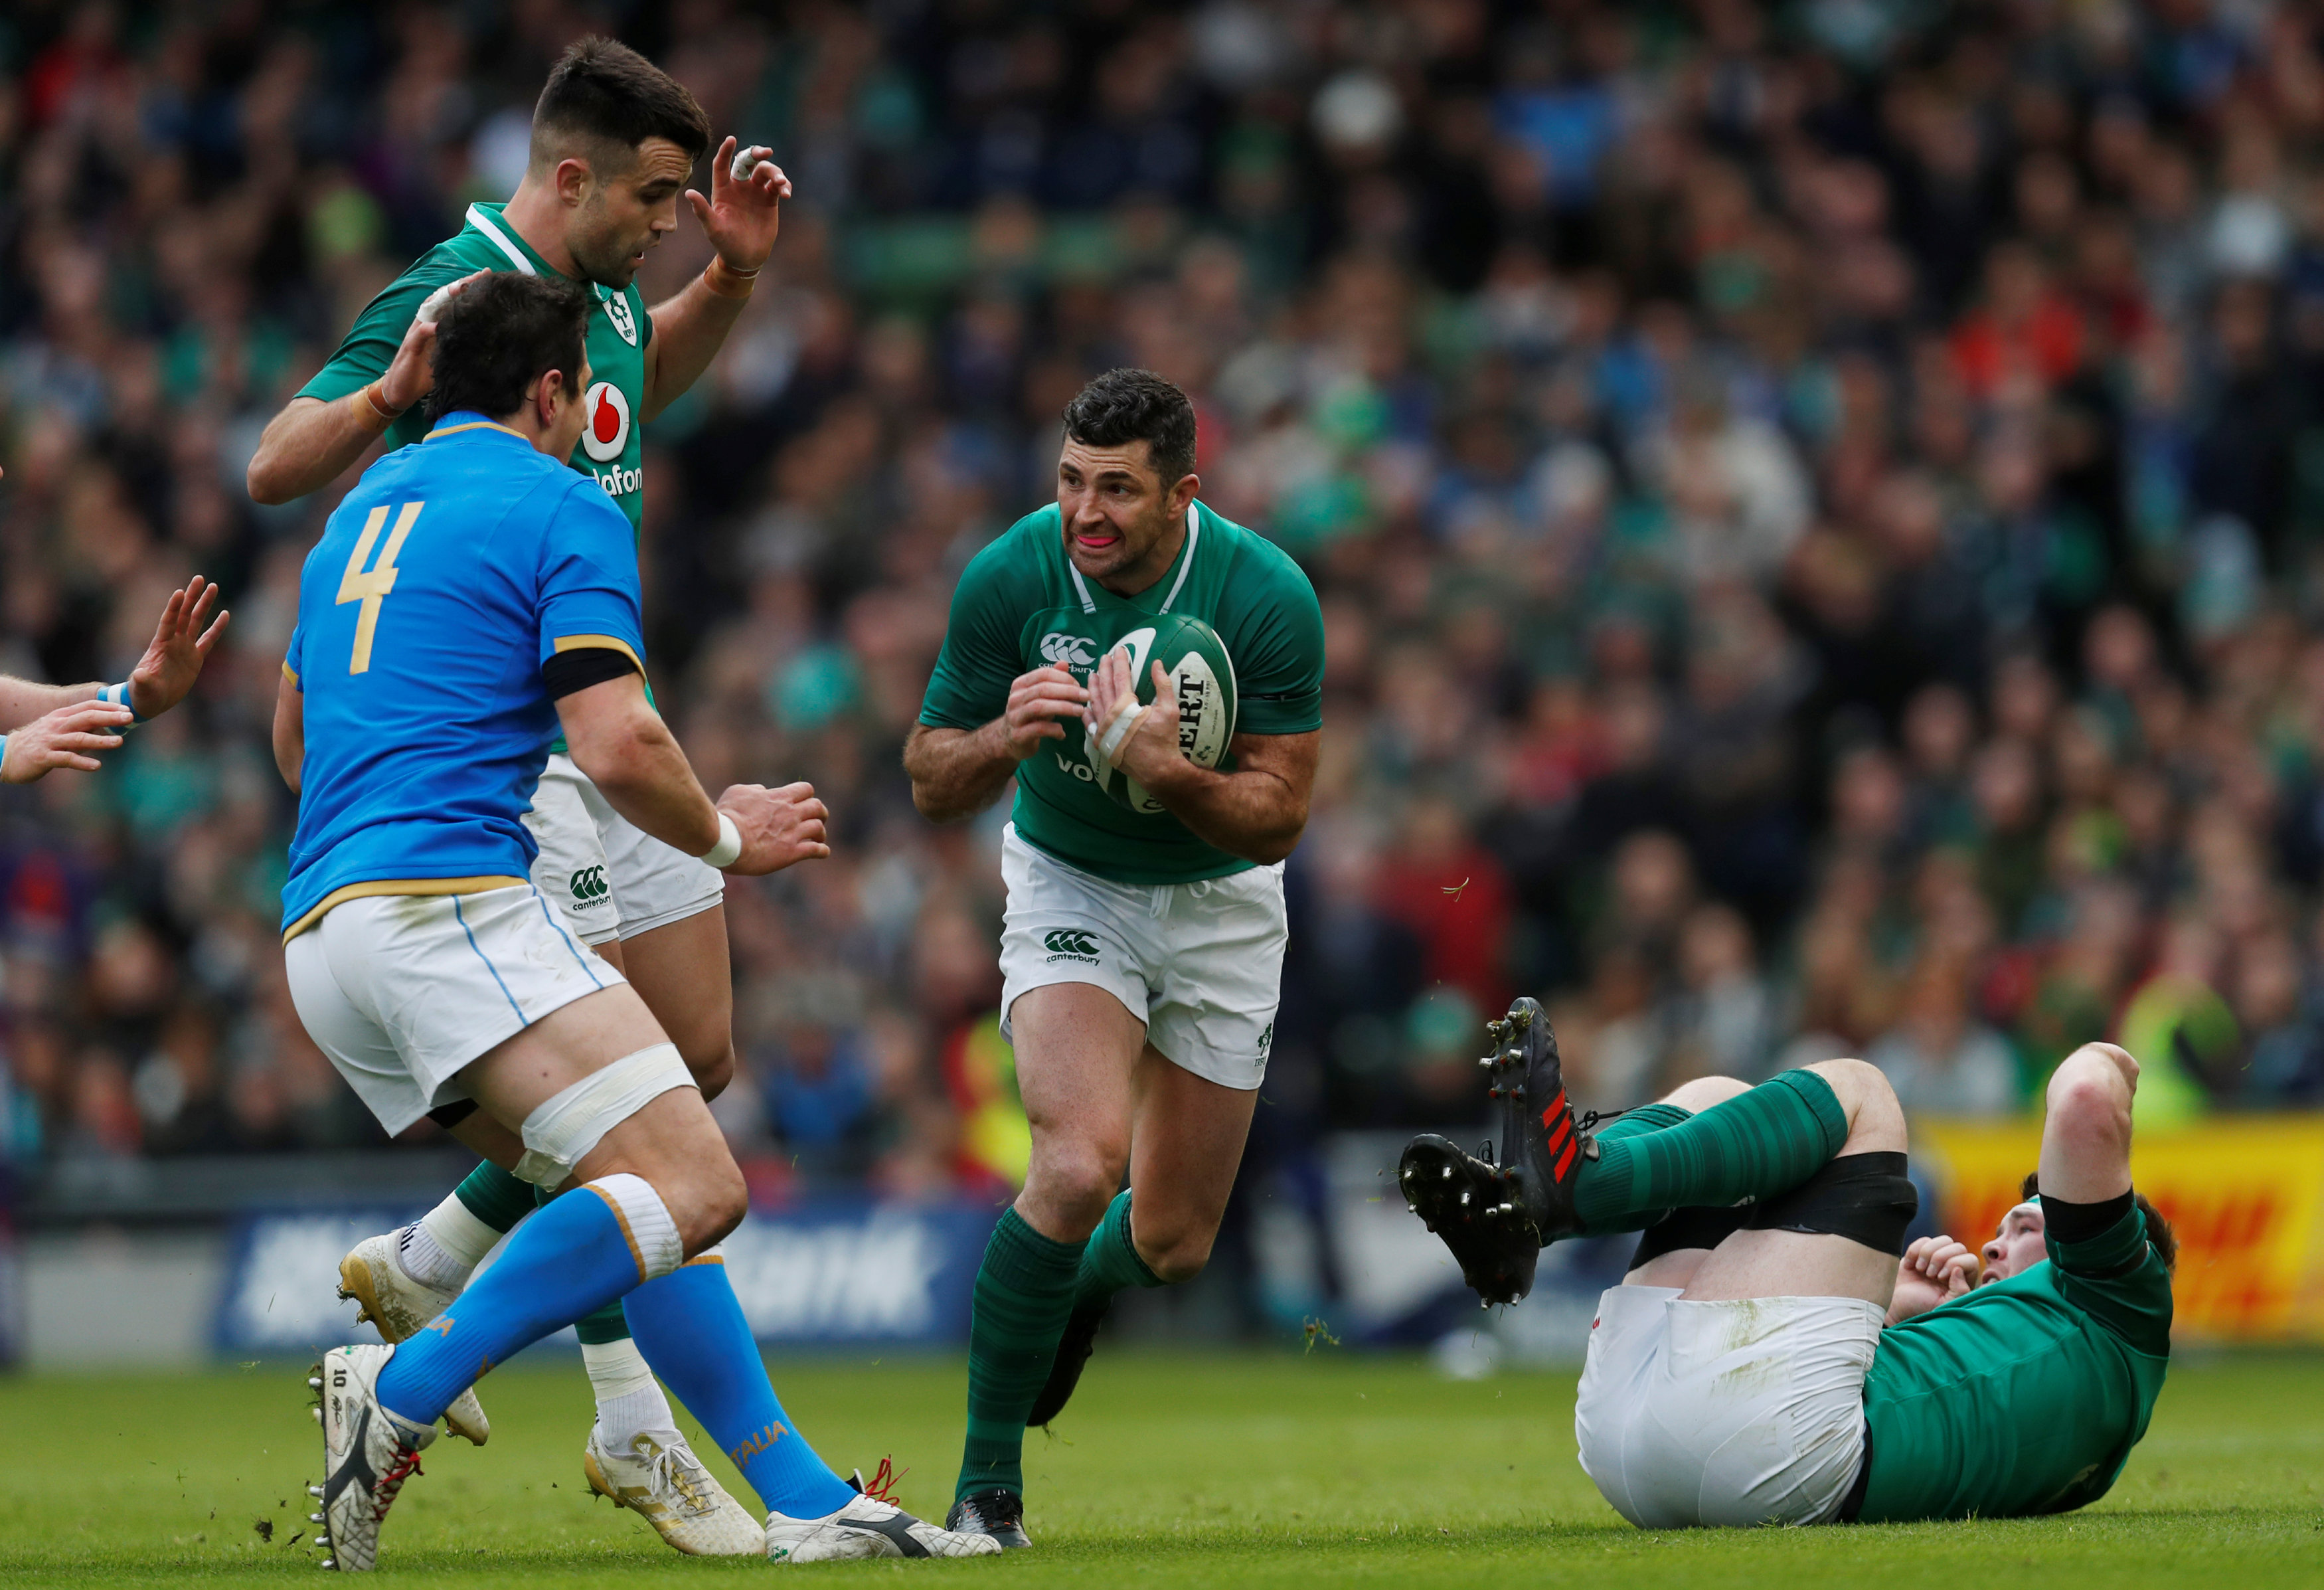 Rugby: Ireland thrash Italy for second successive win